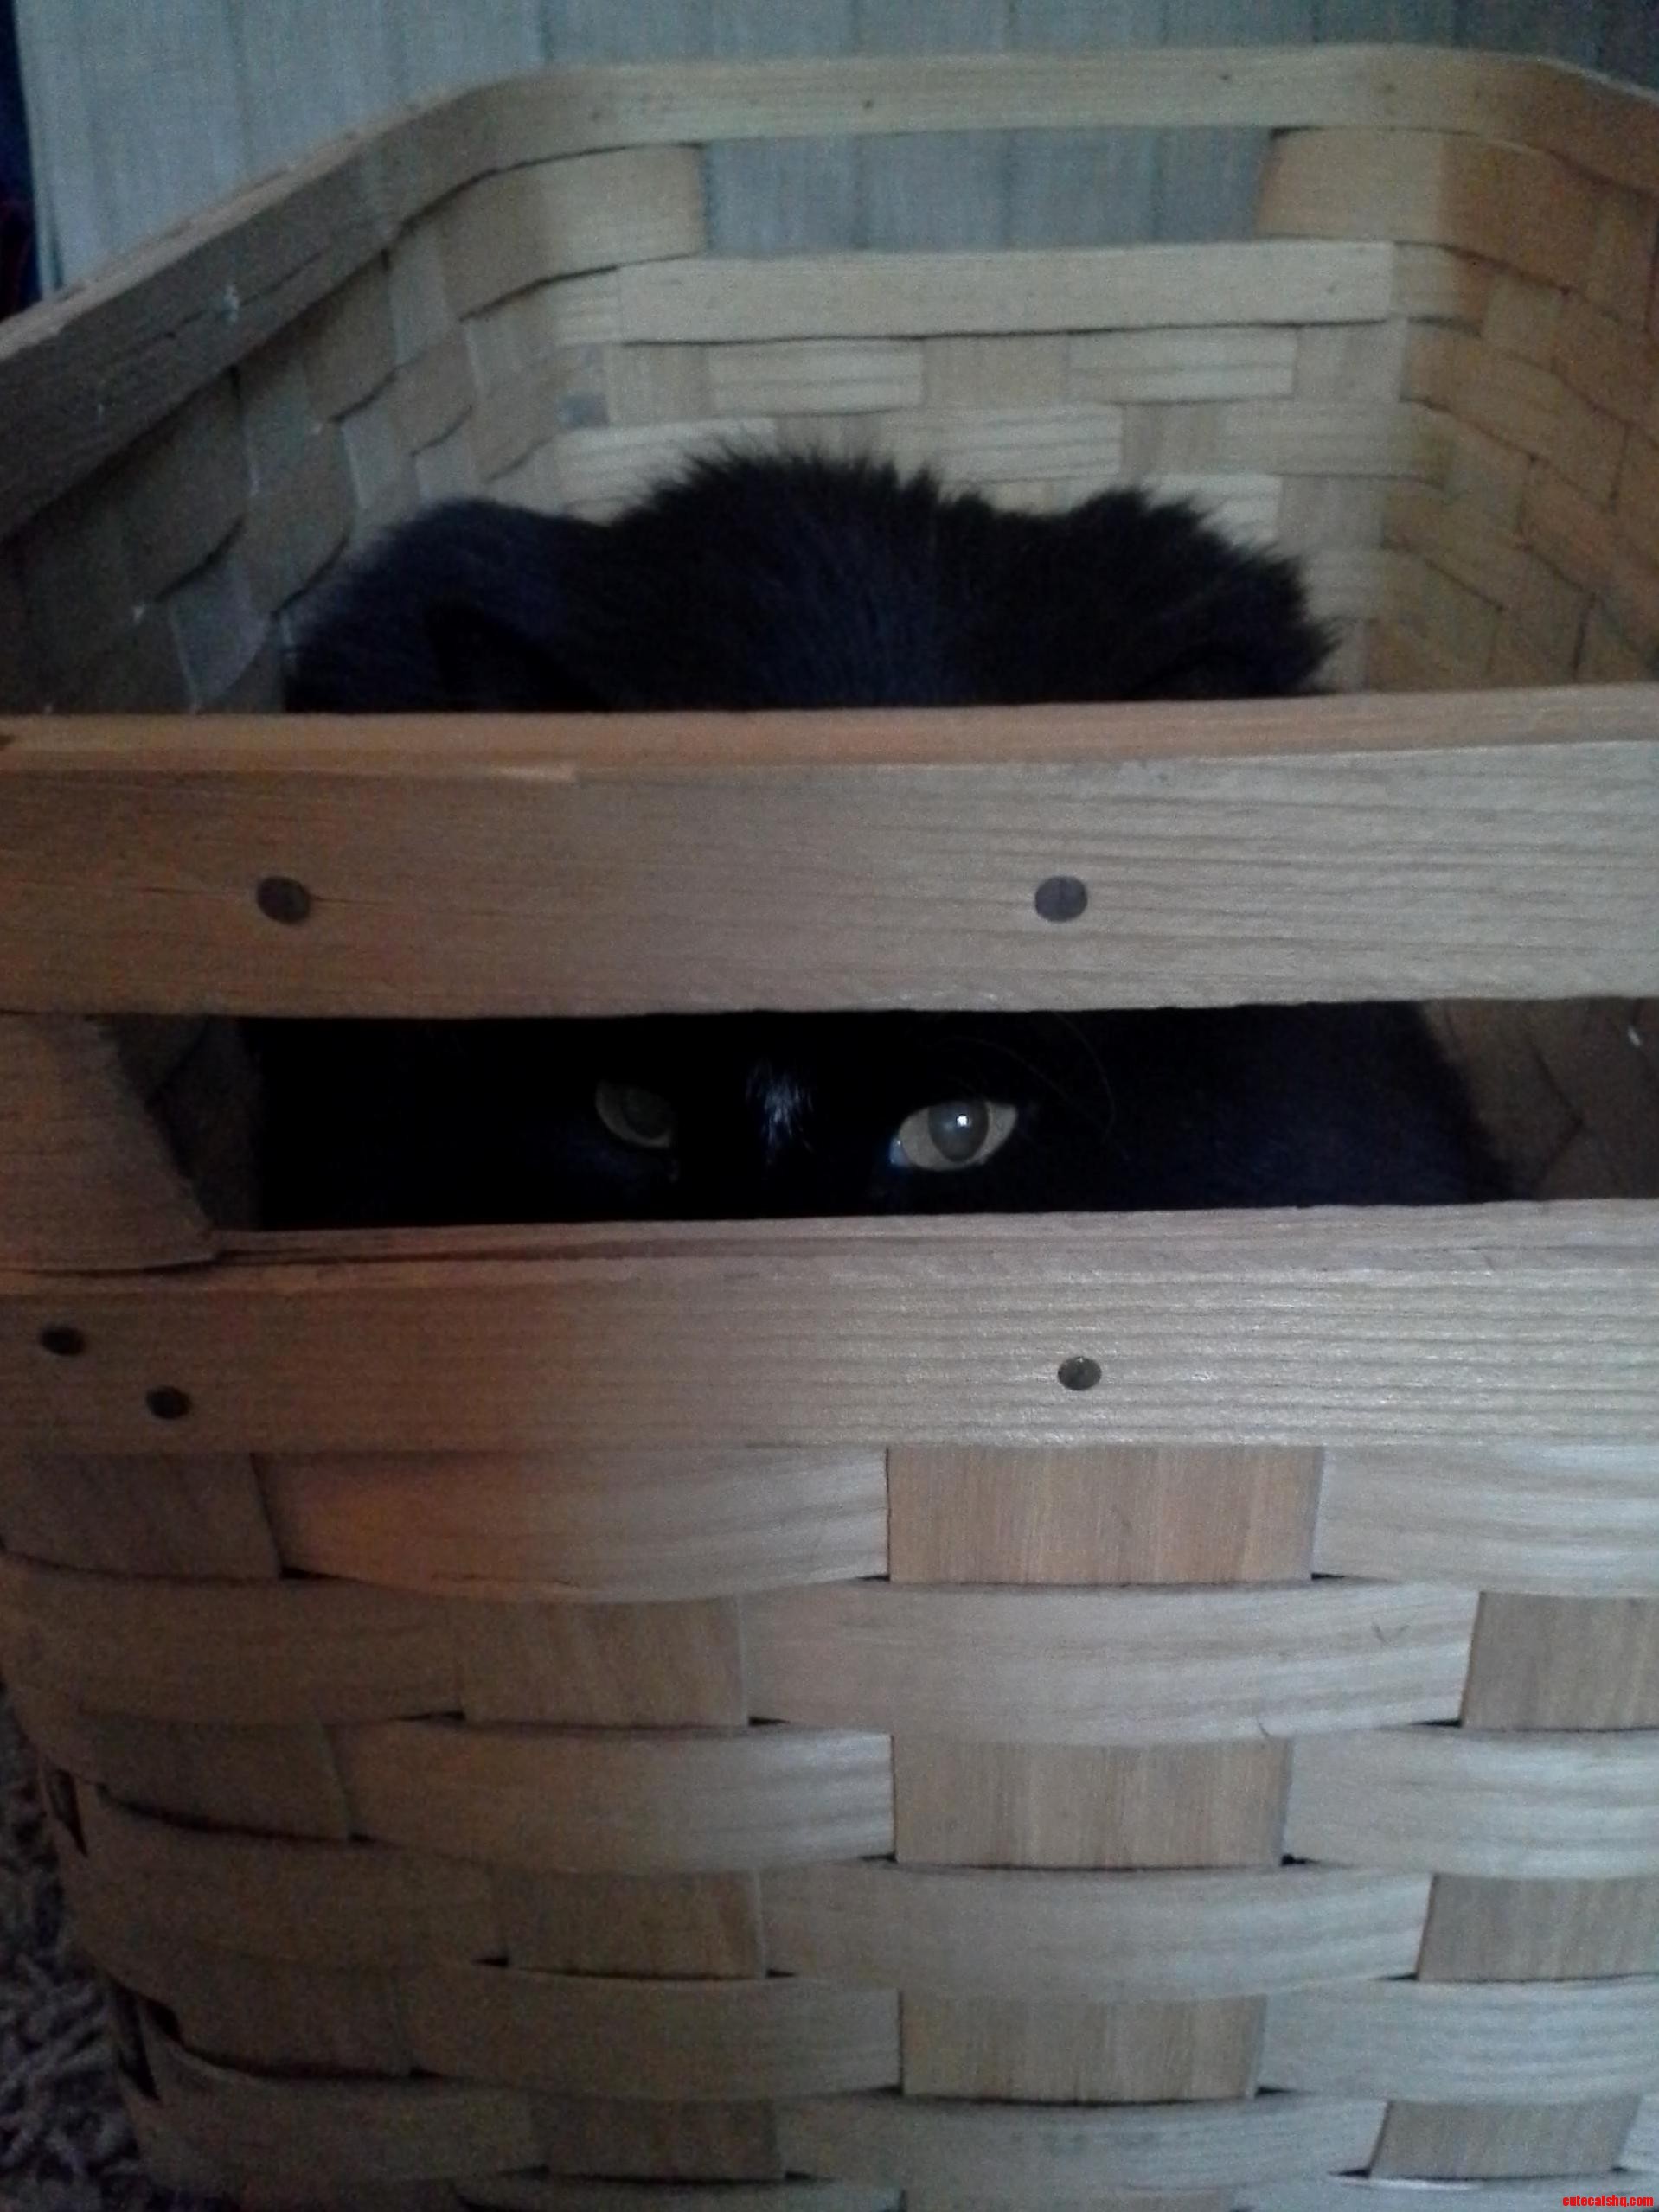 Whats in the basket